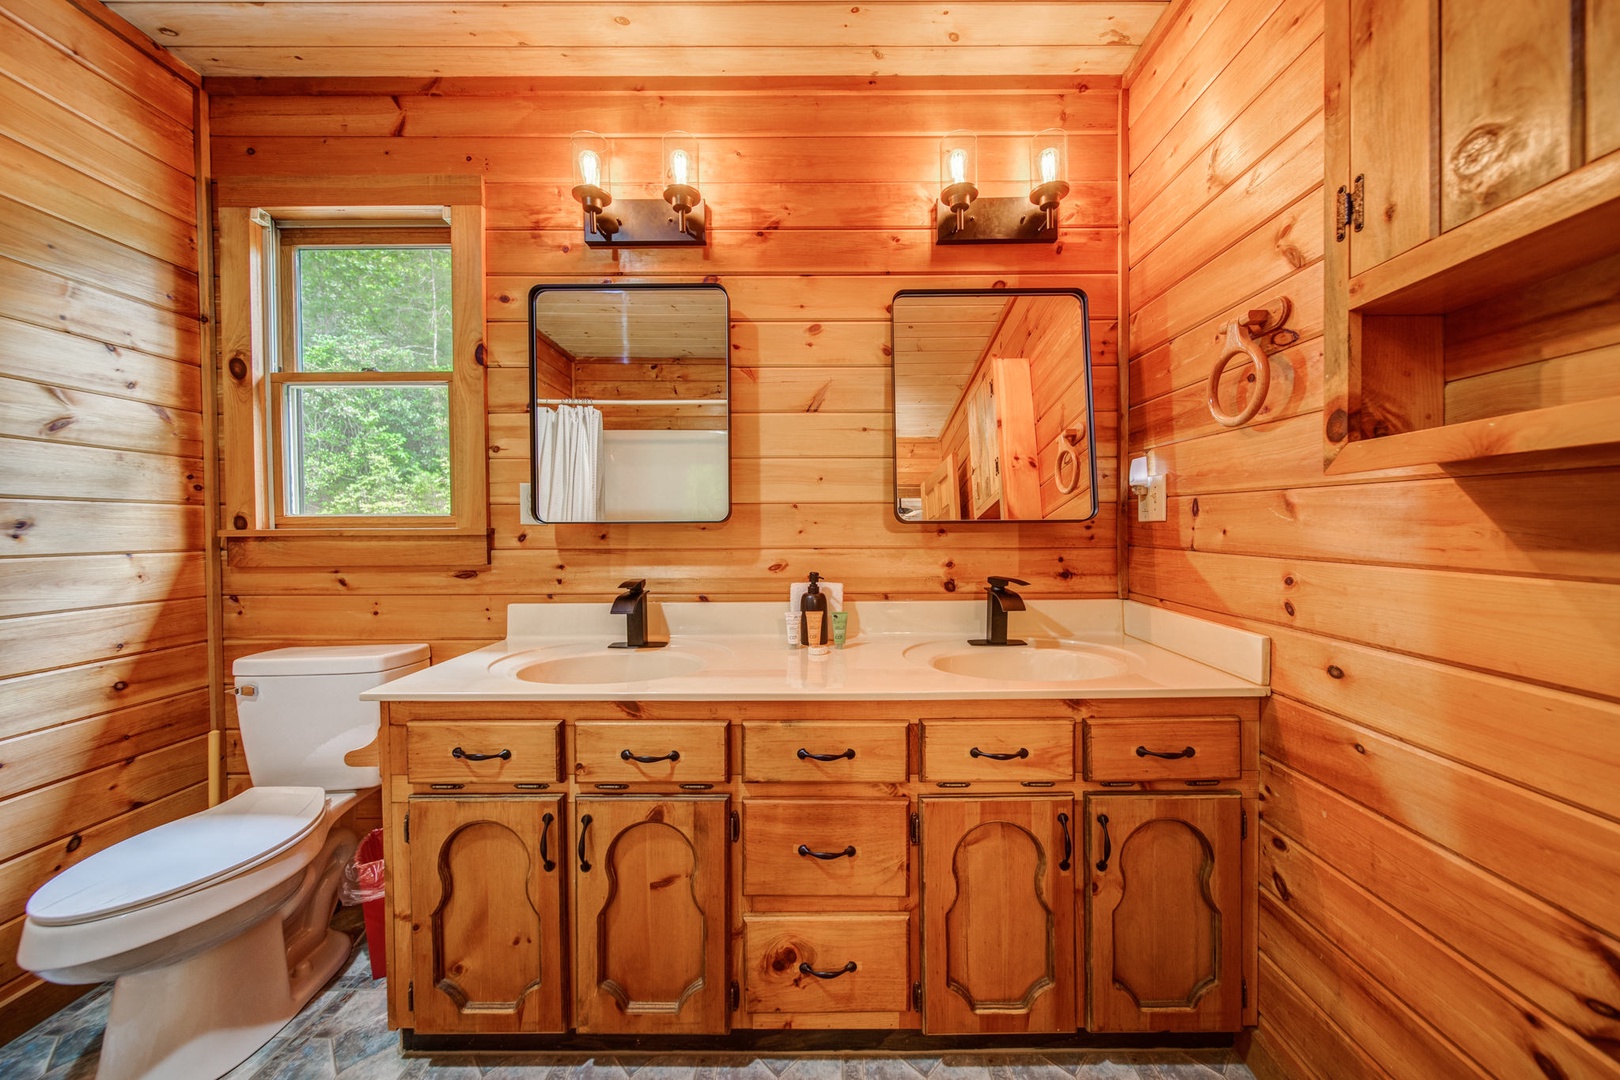 The loft-level bathroom offers a double vanity & walk-in shower